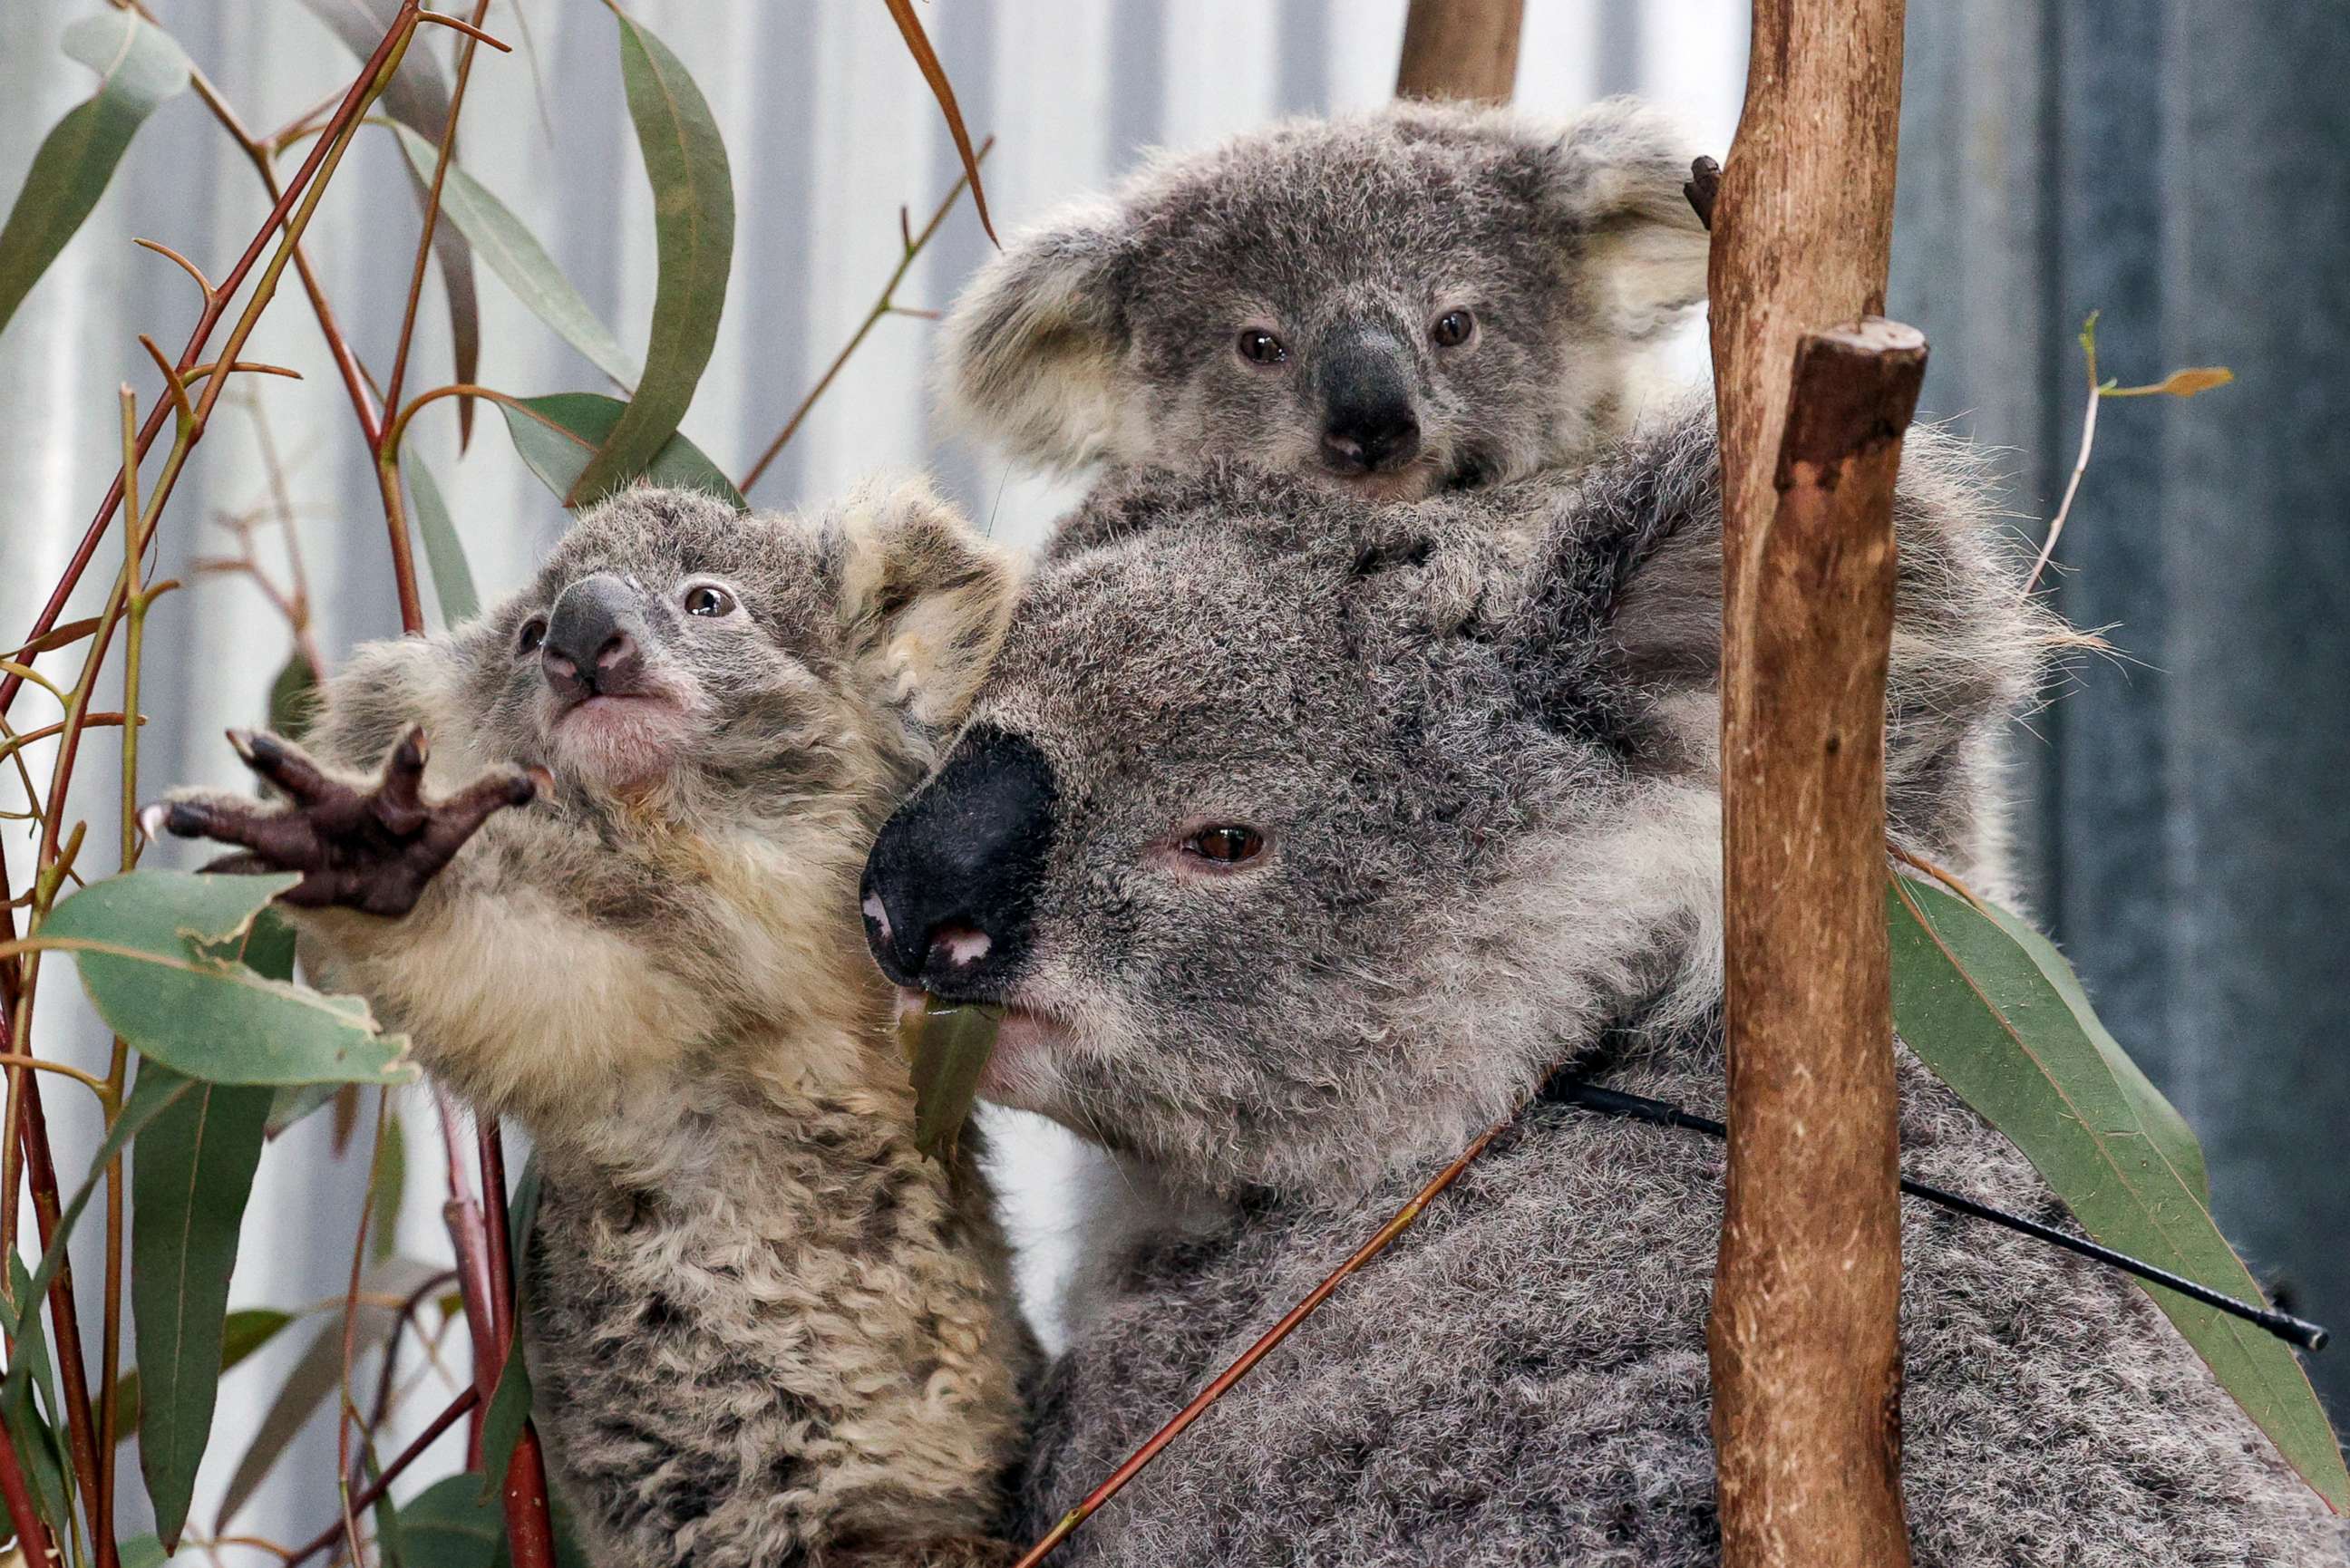 PHOTO: A mother koala named Gladys is pictured with her twin joeys, who have been medically diagnosed as being underweight, at a rehabilitation enclosure next to their carer's home, in Wedderburn, Australia, Sept. 11, 2020.